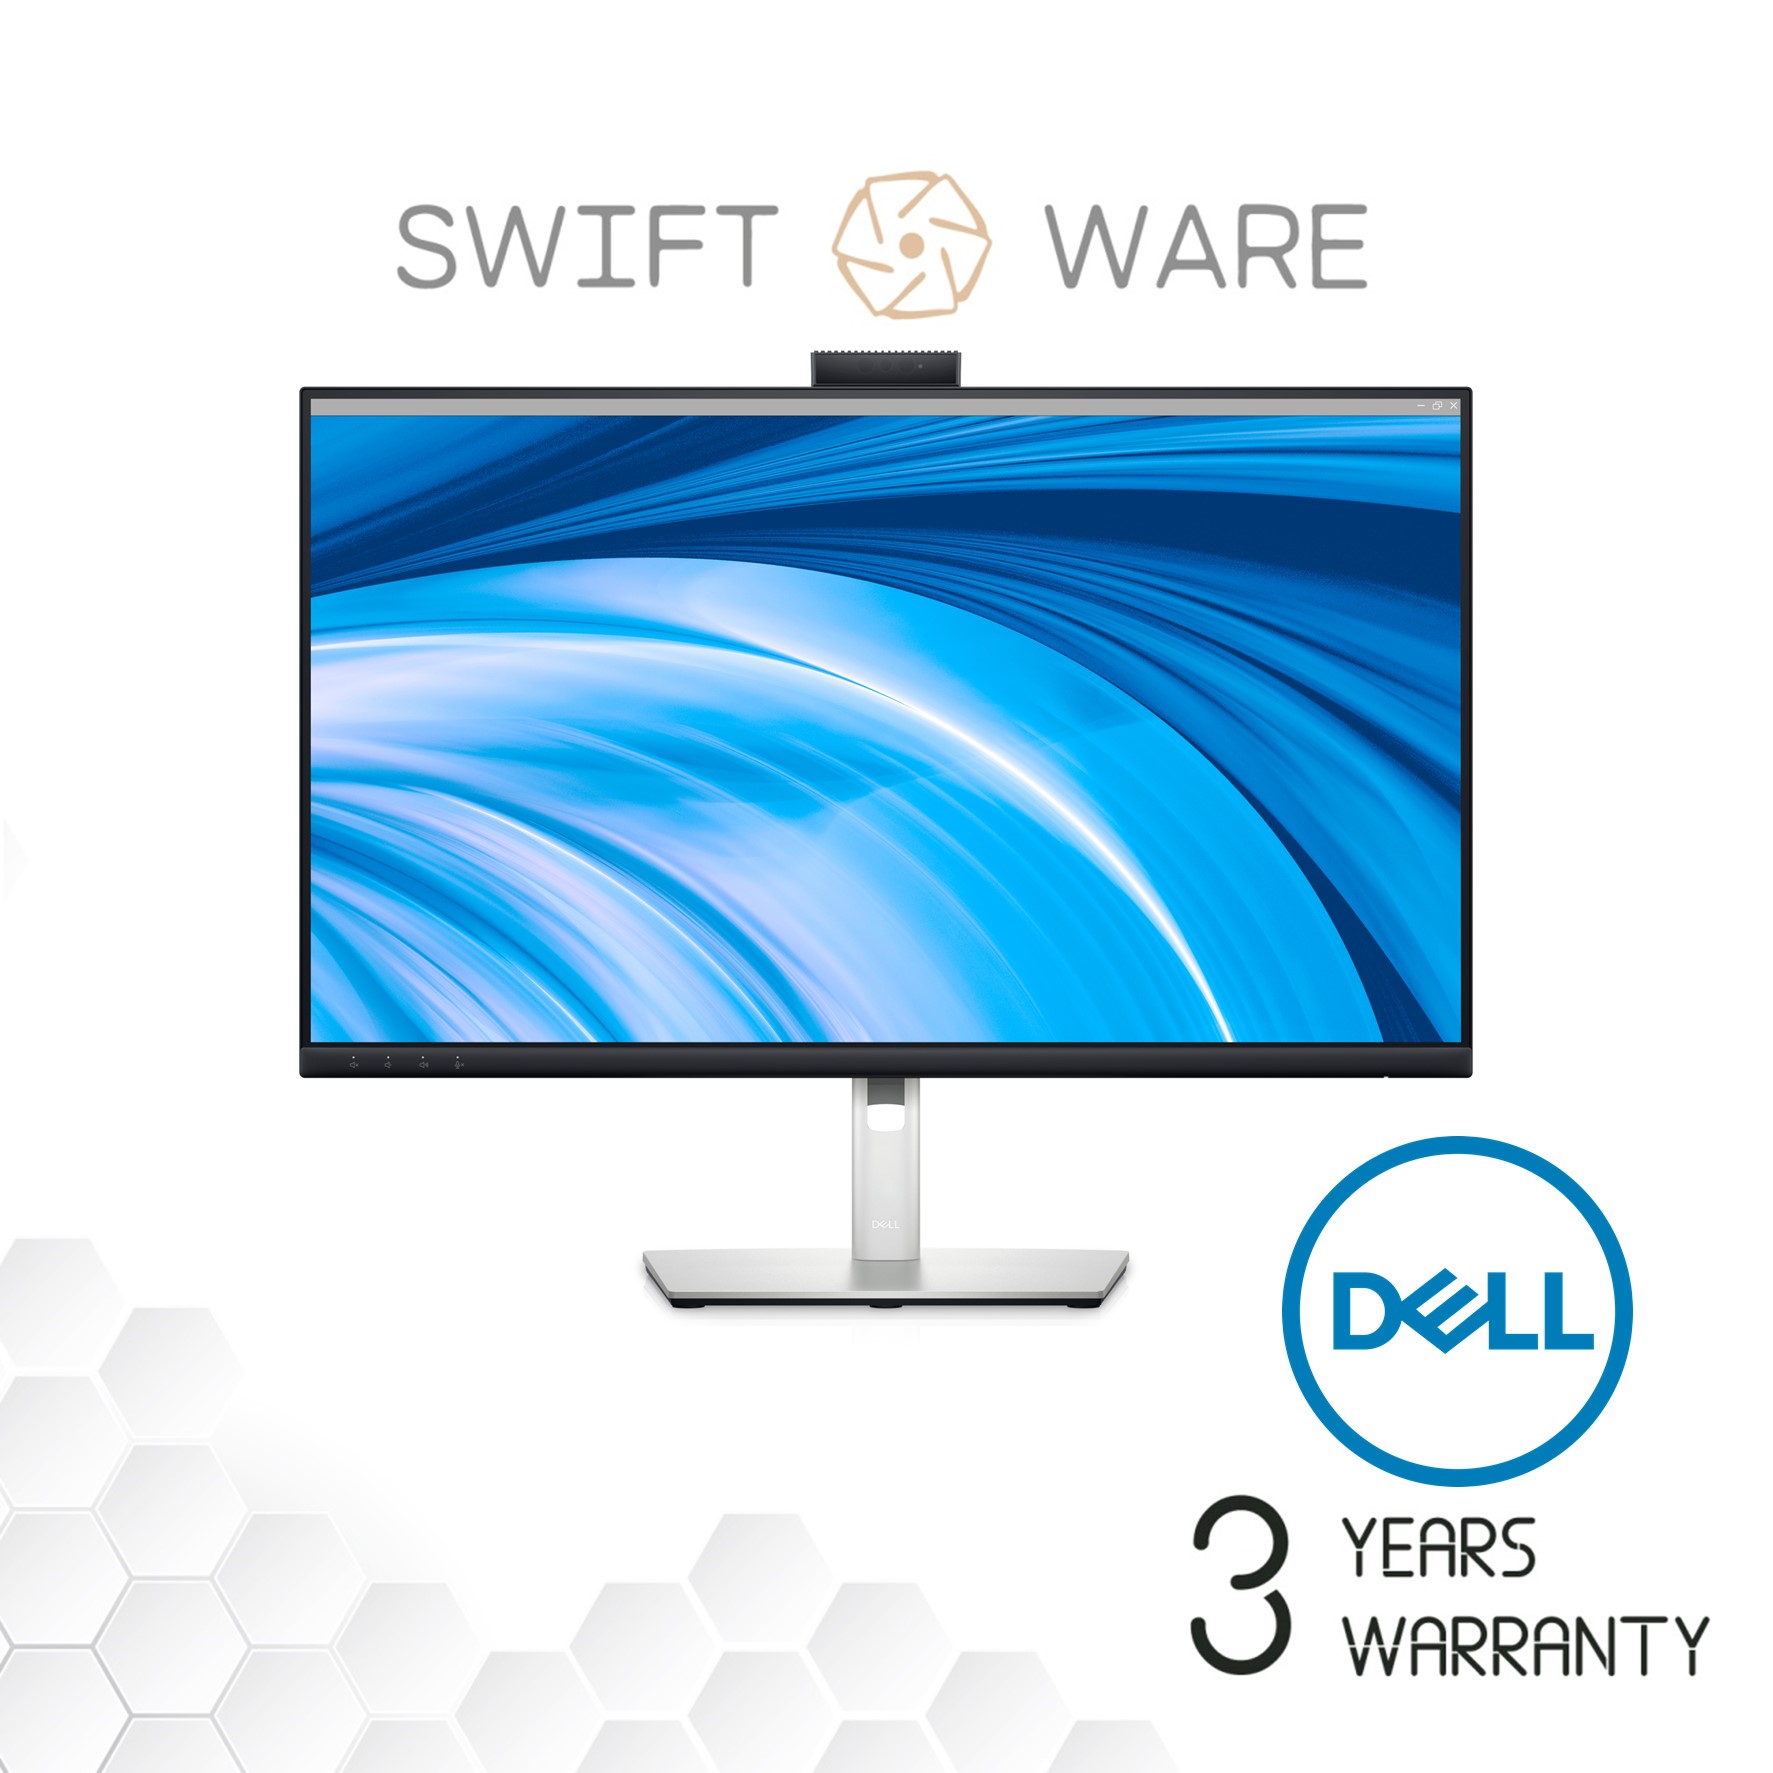 Dell S2340l - Best Price in Singapore - Aug 2022 